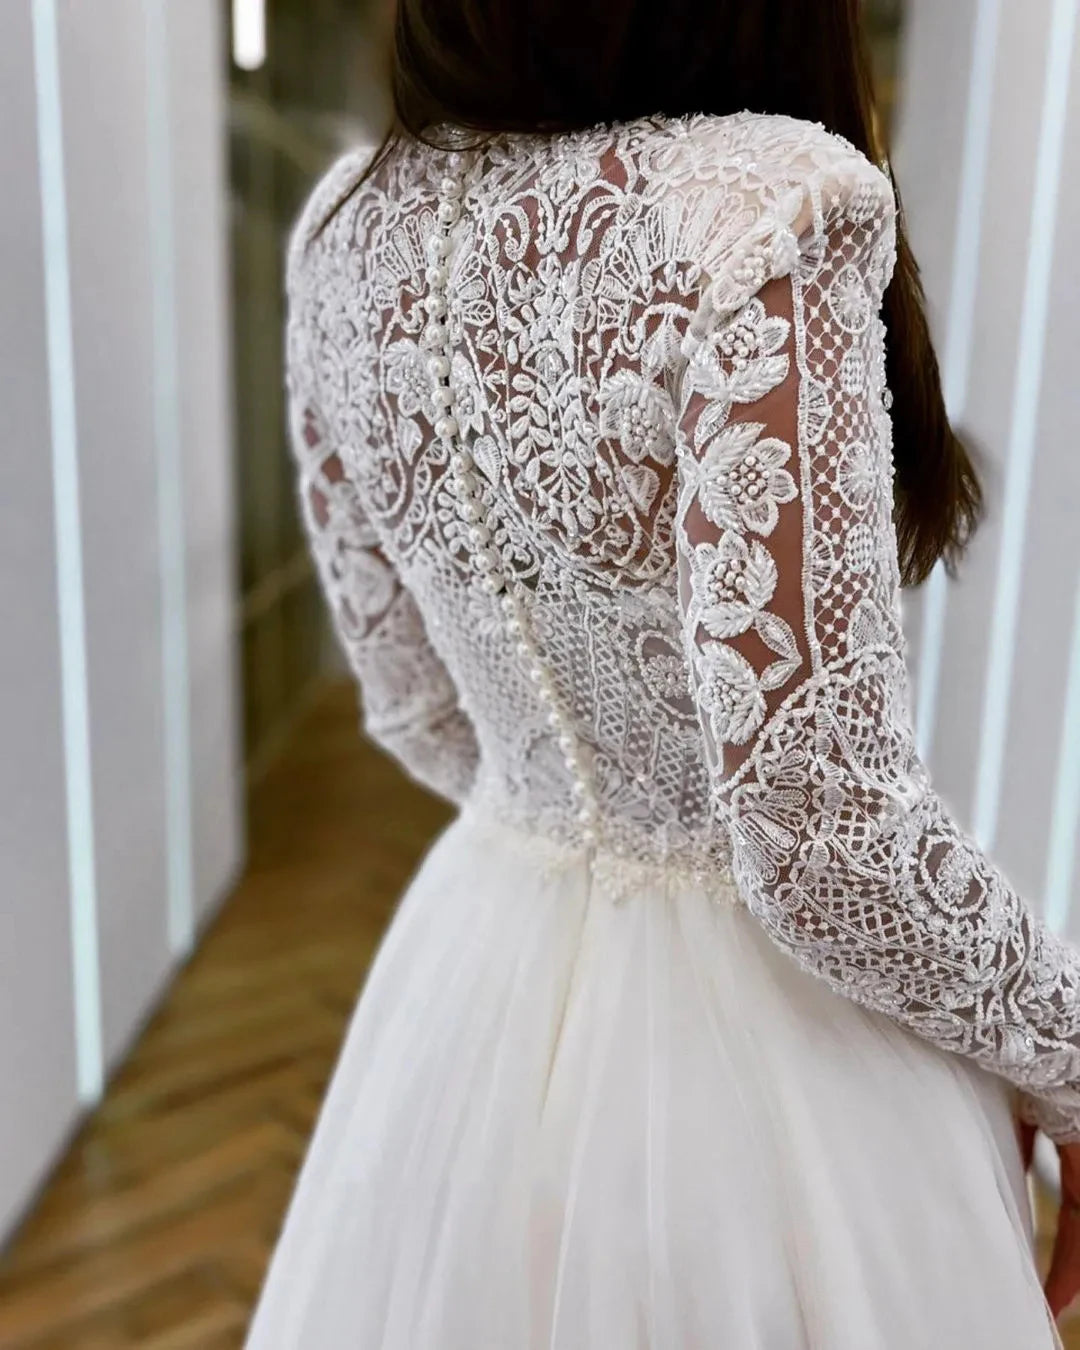 Boho Romantic Wedding Dresses Mermaid High Neck Long Sleeves Exquisite Lace Appliques Princess Style Beach Mopping Bride Gowns